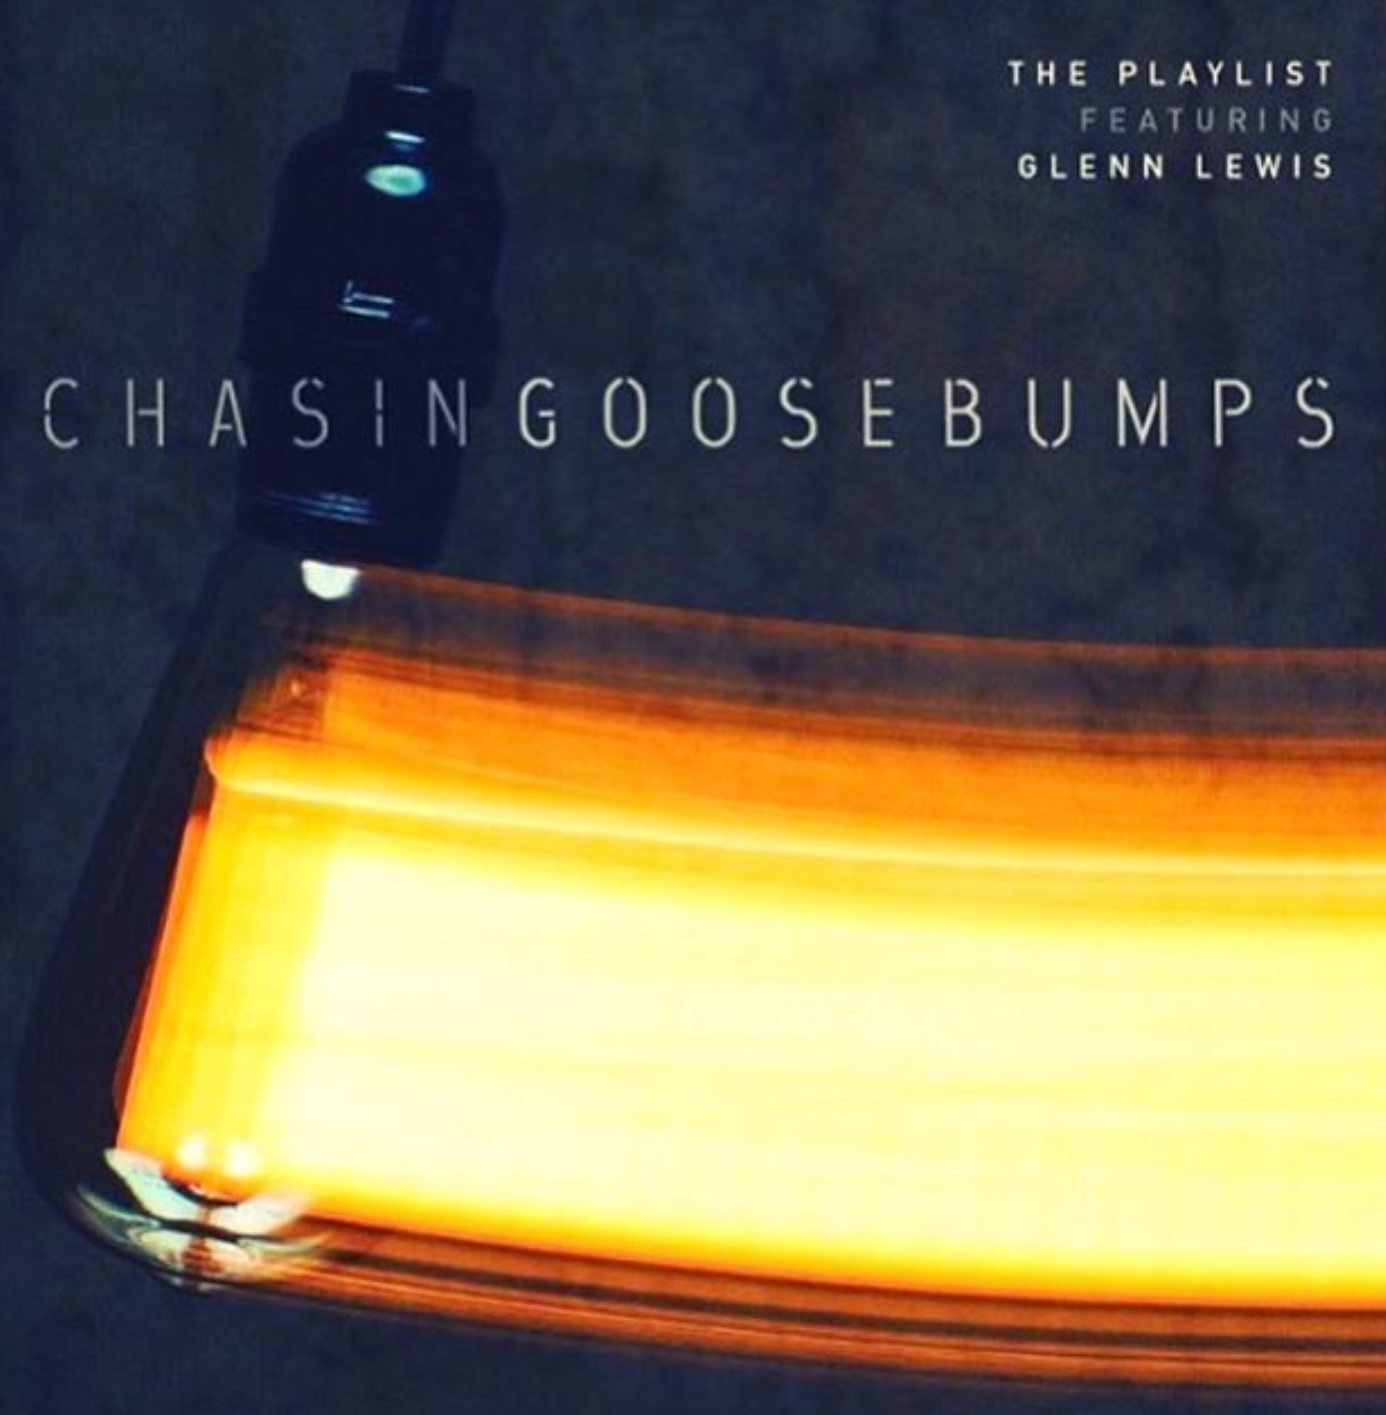 DJ Jazzy Jeff to Release "Chasing Goosebumps" Album Featuring Glenn Lewis on Every Song